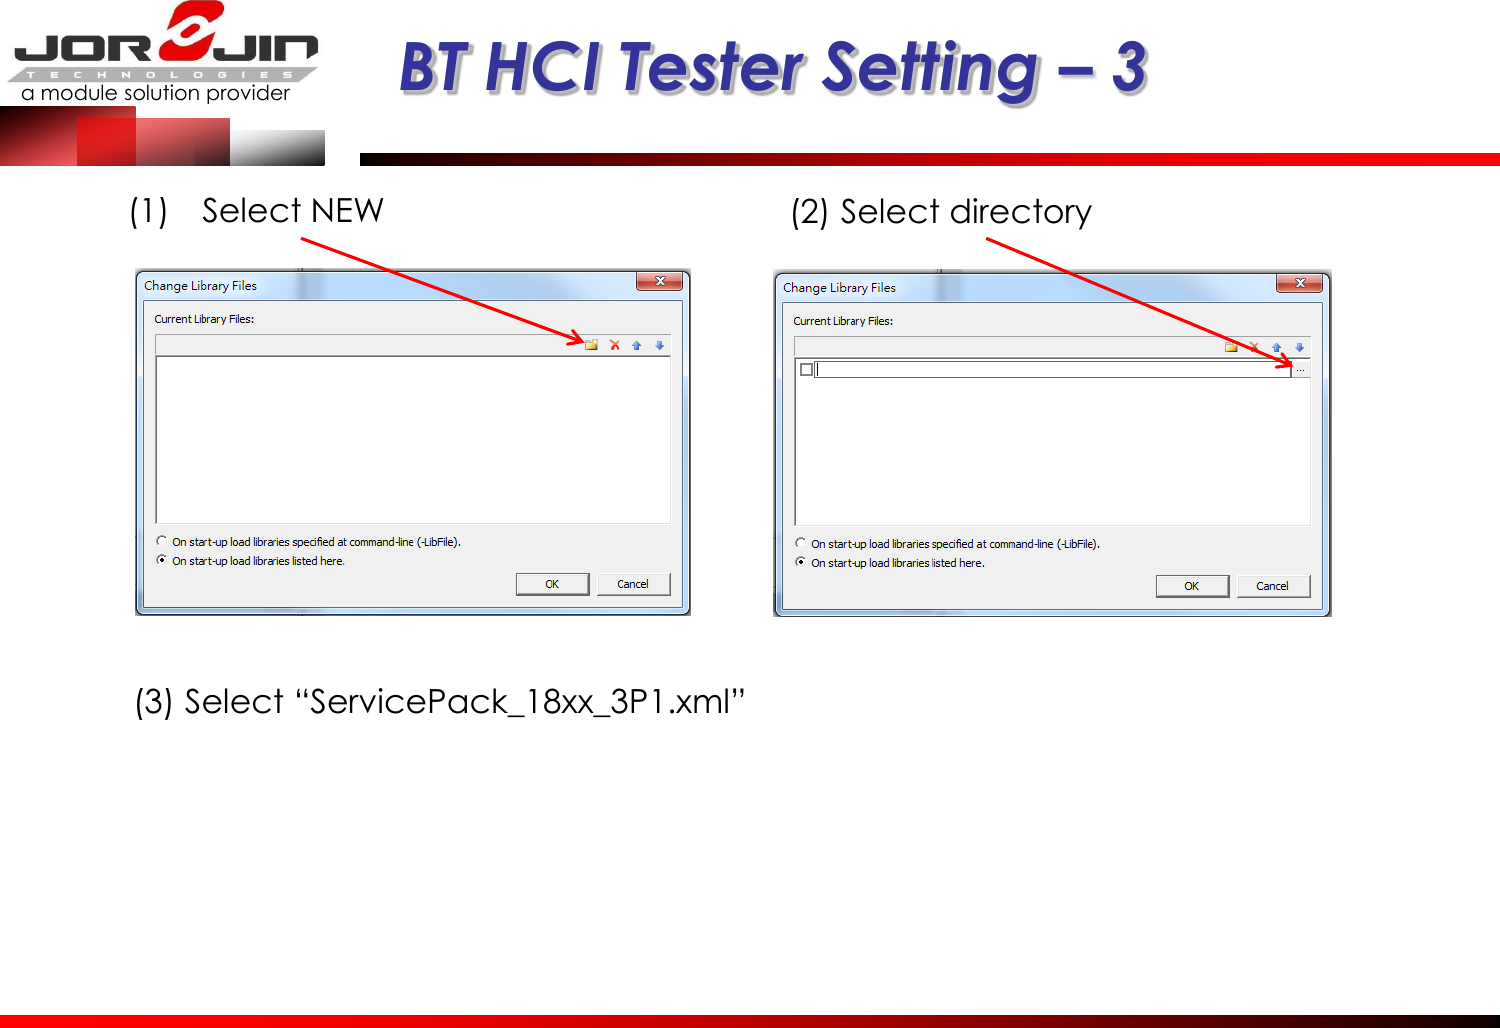 a module solution provider  BT HCI Tester Setting – 3 (1) Select NEW  (2) Select directory (3) Select “ServicePack_18xx_3P1.xml” 